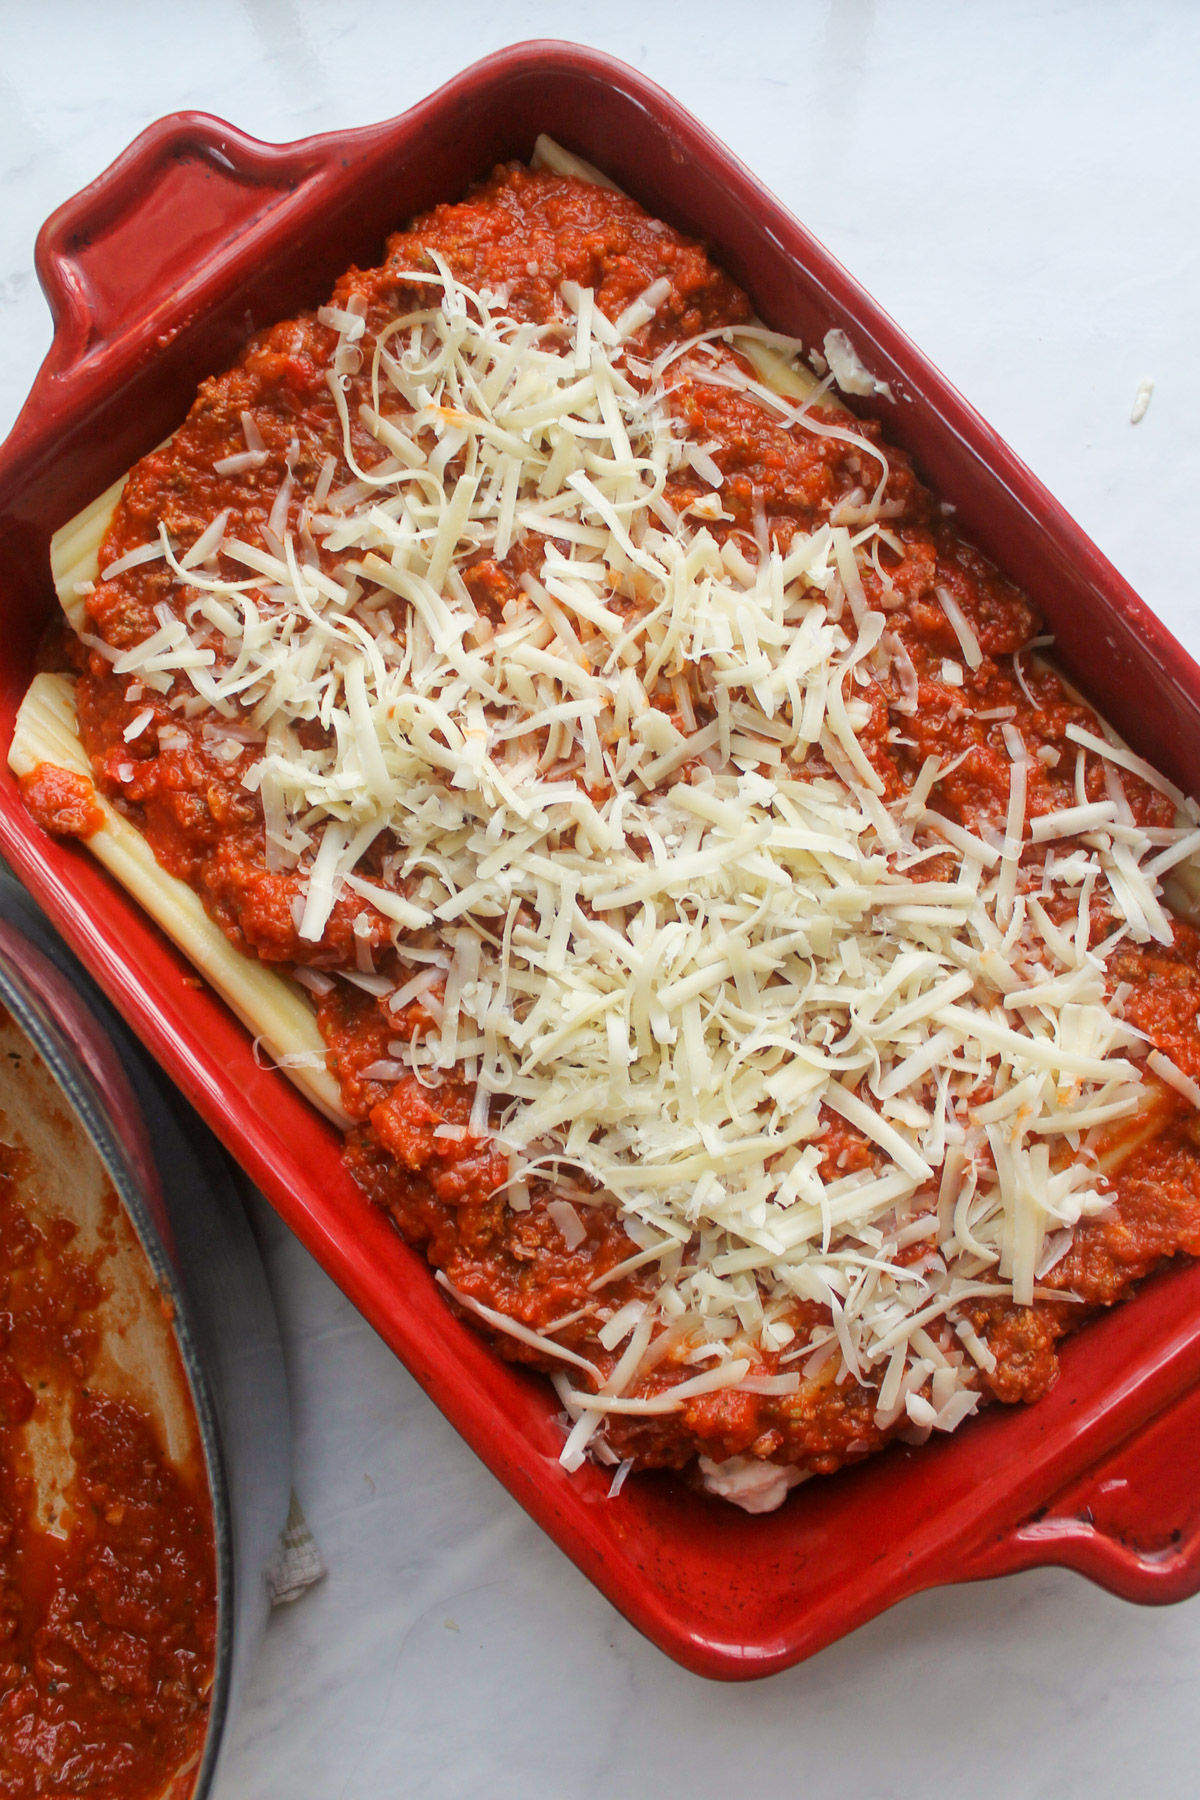 Manicotti topped with meat sauce and white shredded cheese ready to bake.